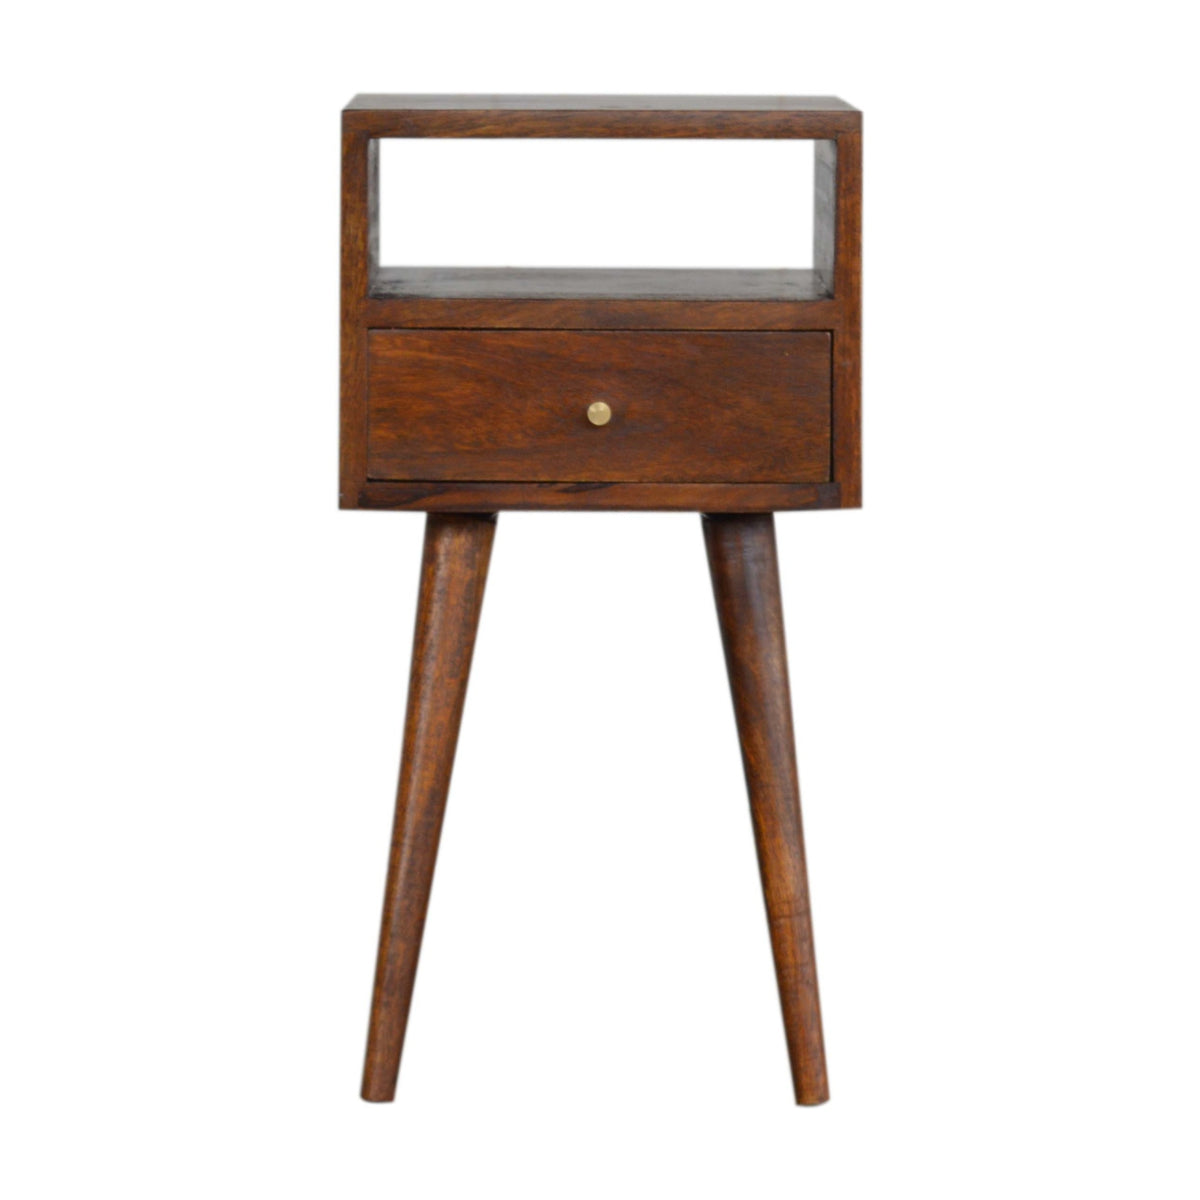 Mini walnut bedside table for sale uk compact walnut bedside table small uk 8904350001279 slim walnut bedside table uk